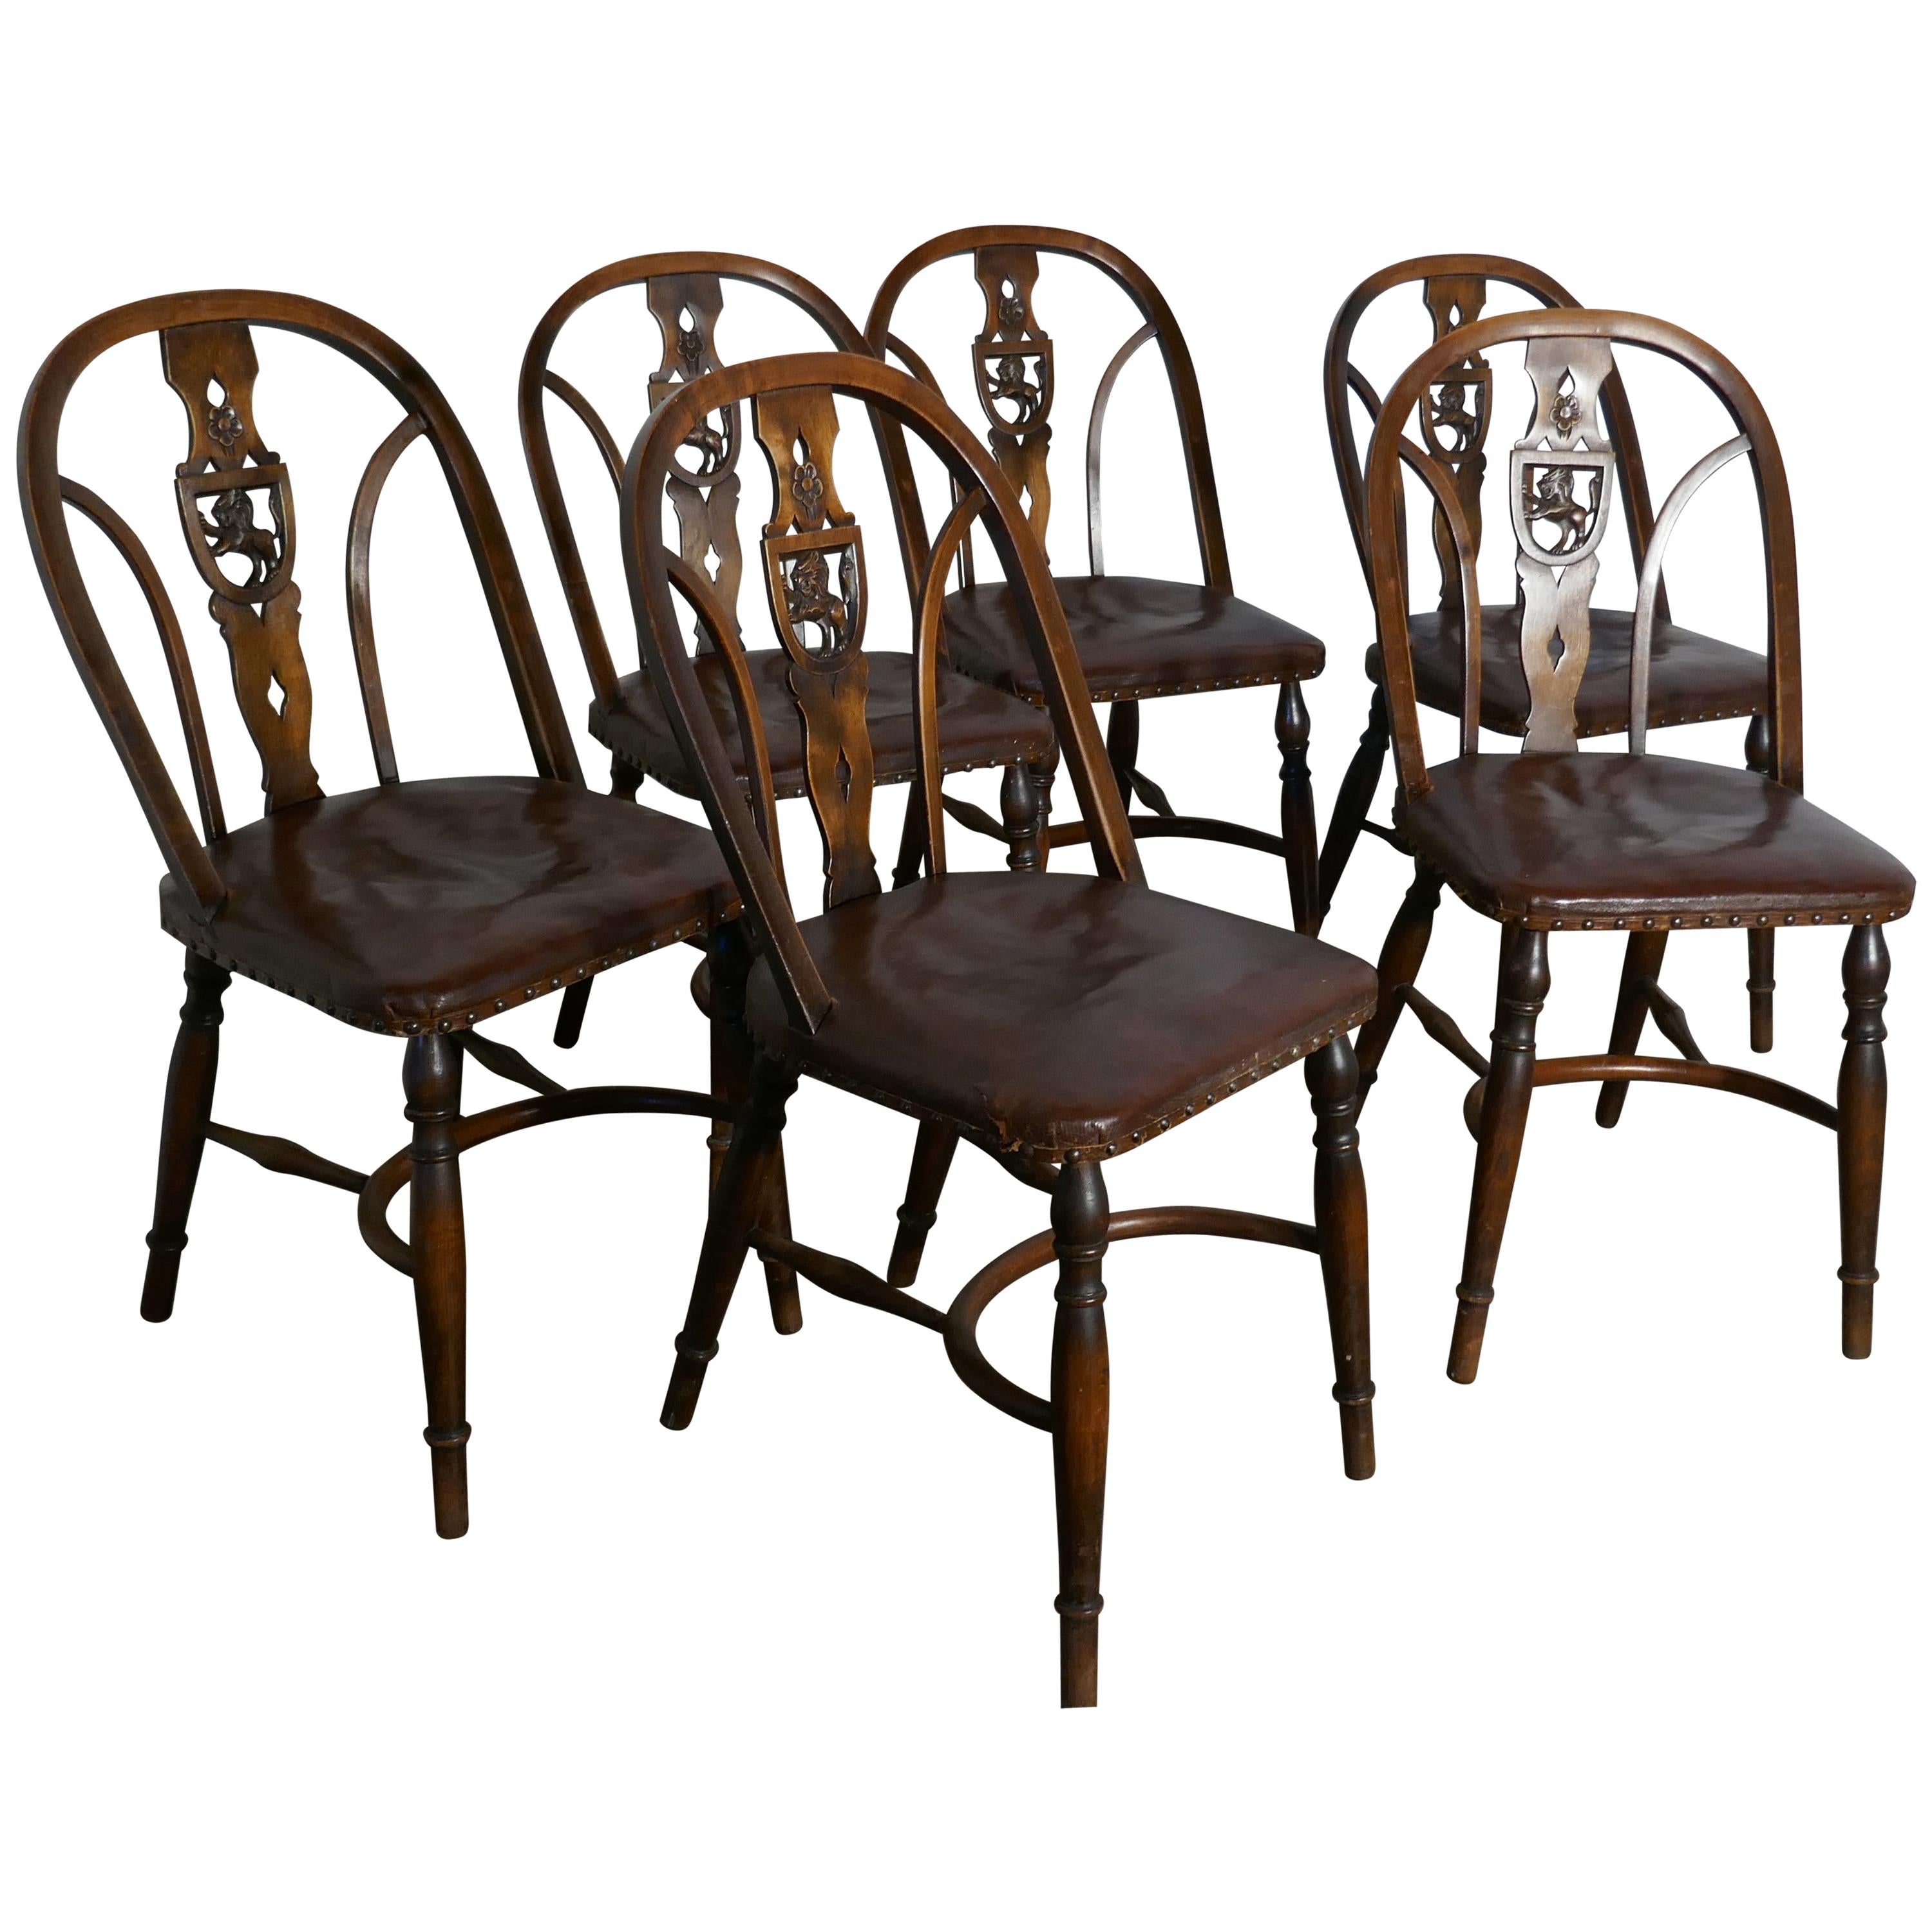 Set of 6 Arts & Crafts Gothic Heraldic Lion Back Windsor Chairs